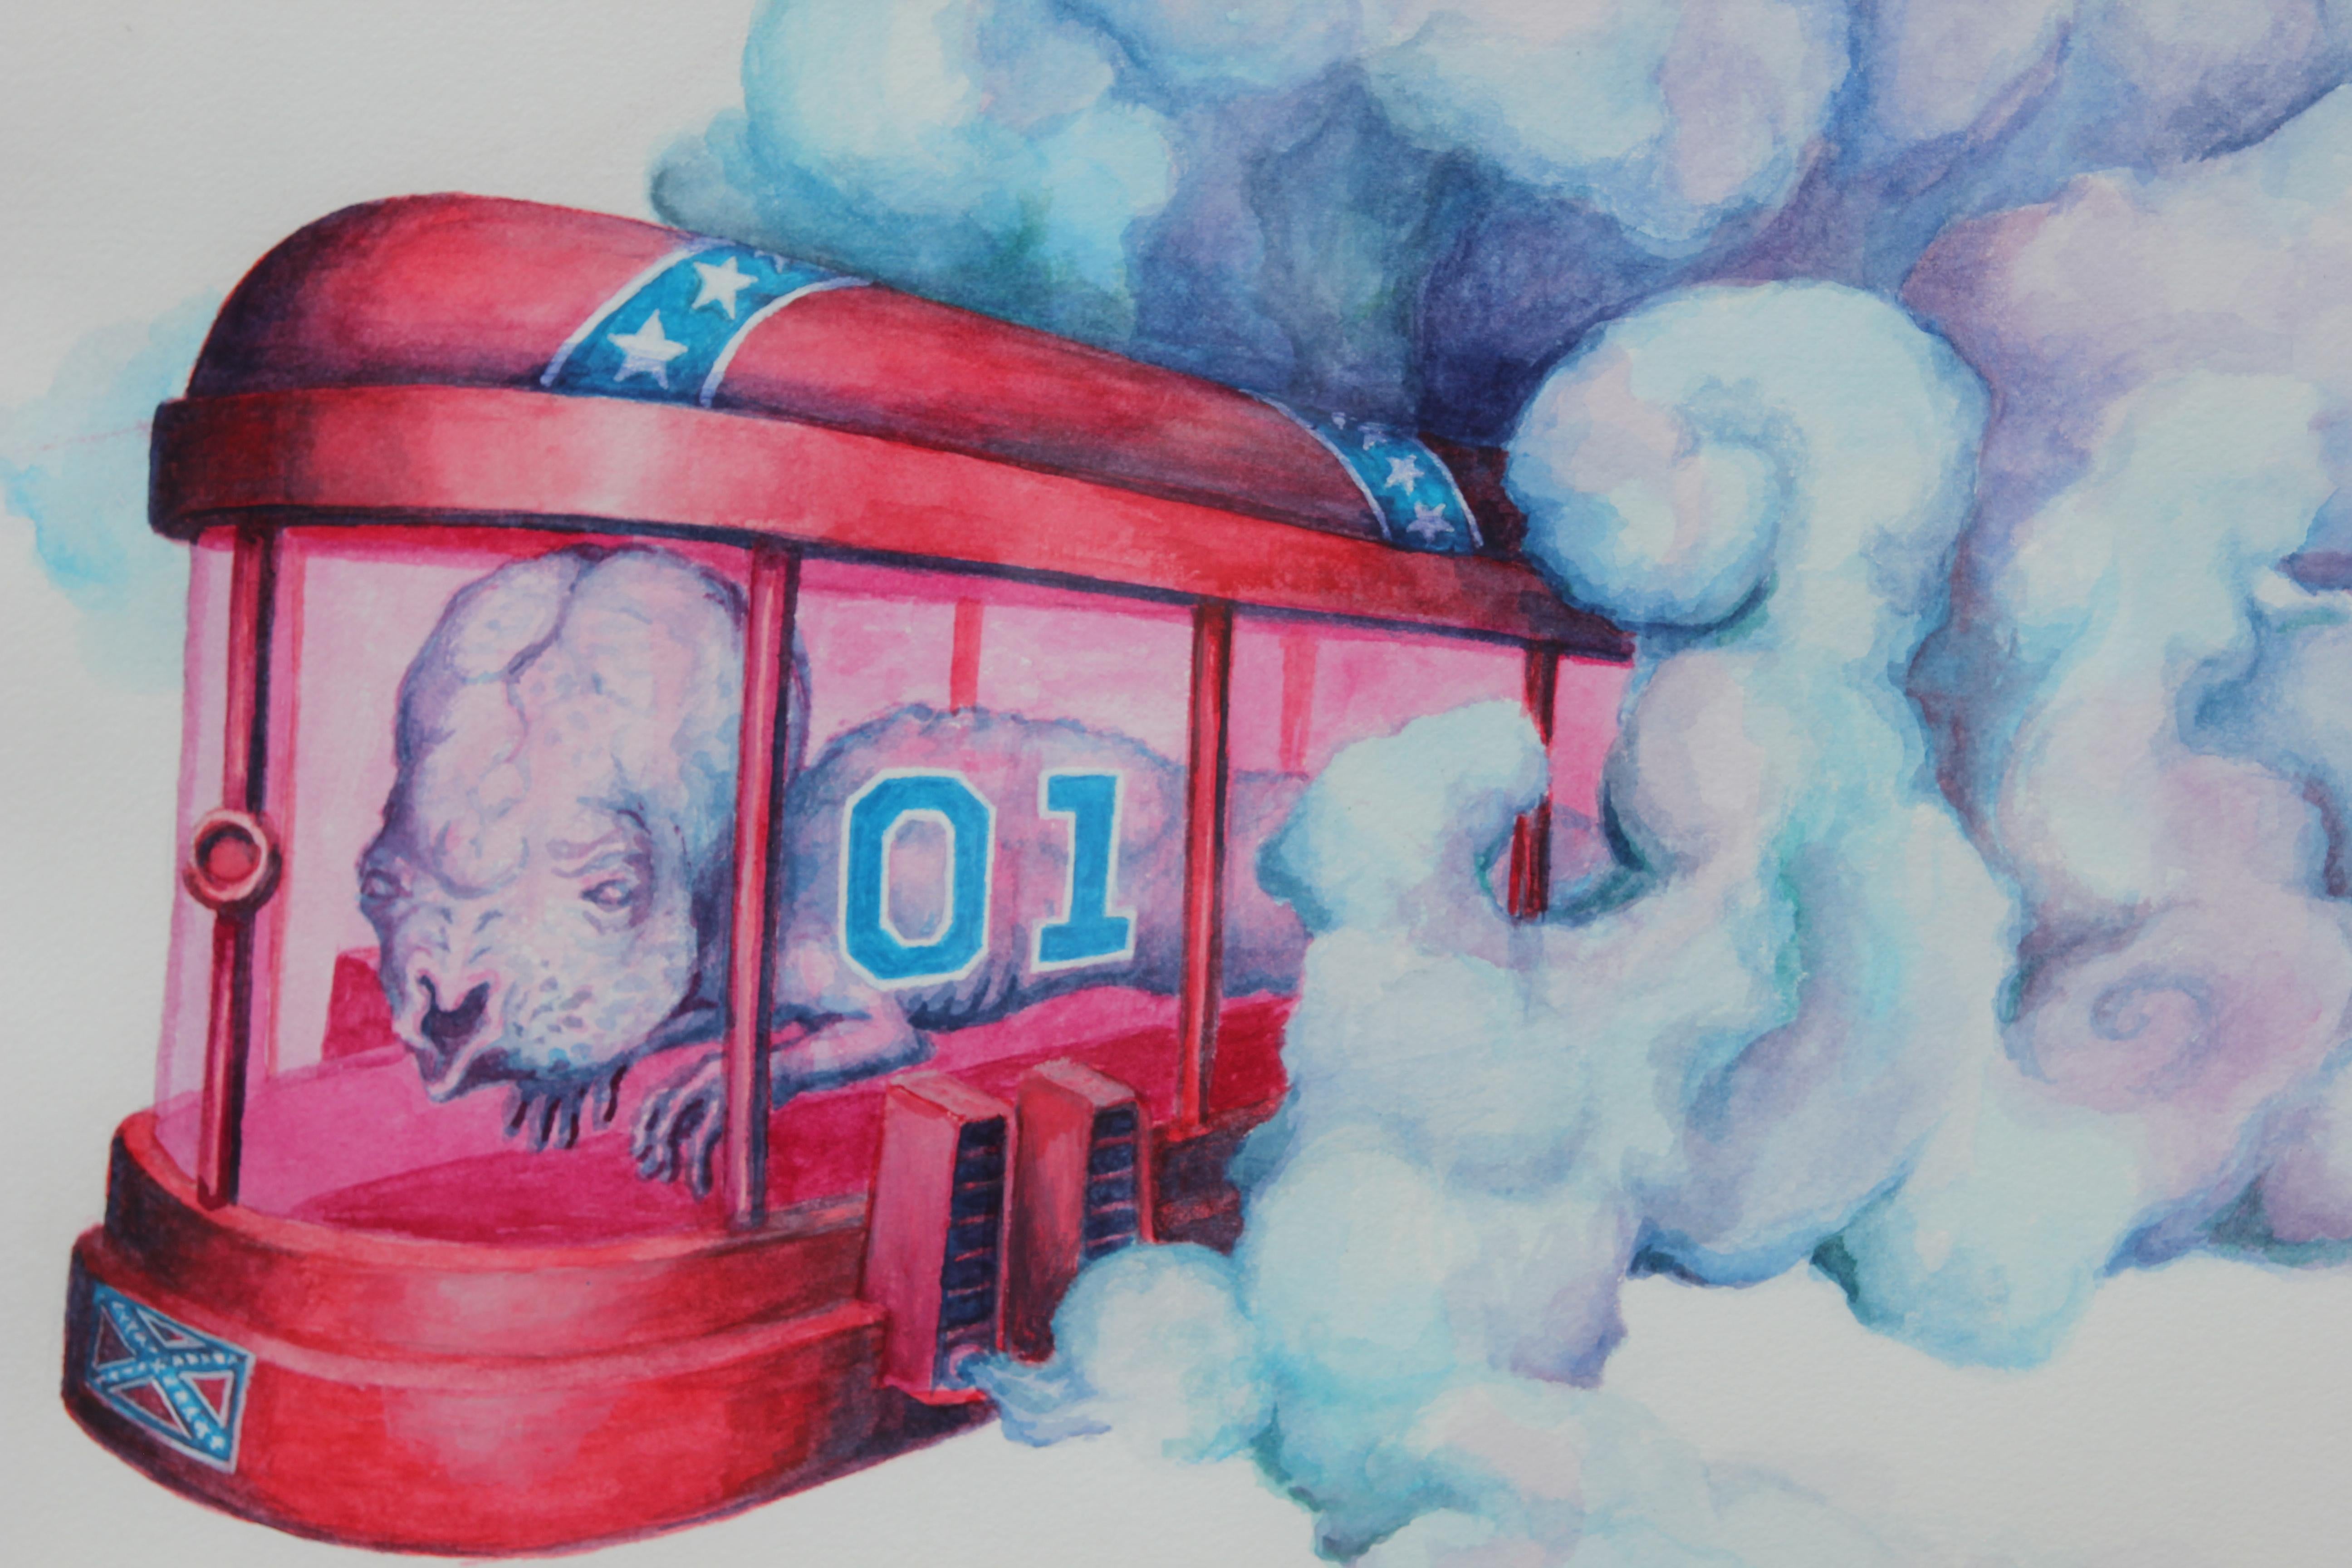 “Fold Space from Hazard” Red and Blue Realistic Pop Culture Watercolor Painting - Pop Art Art by Scott Burns